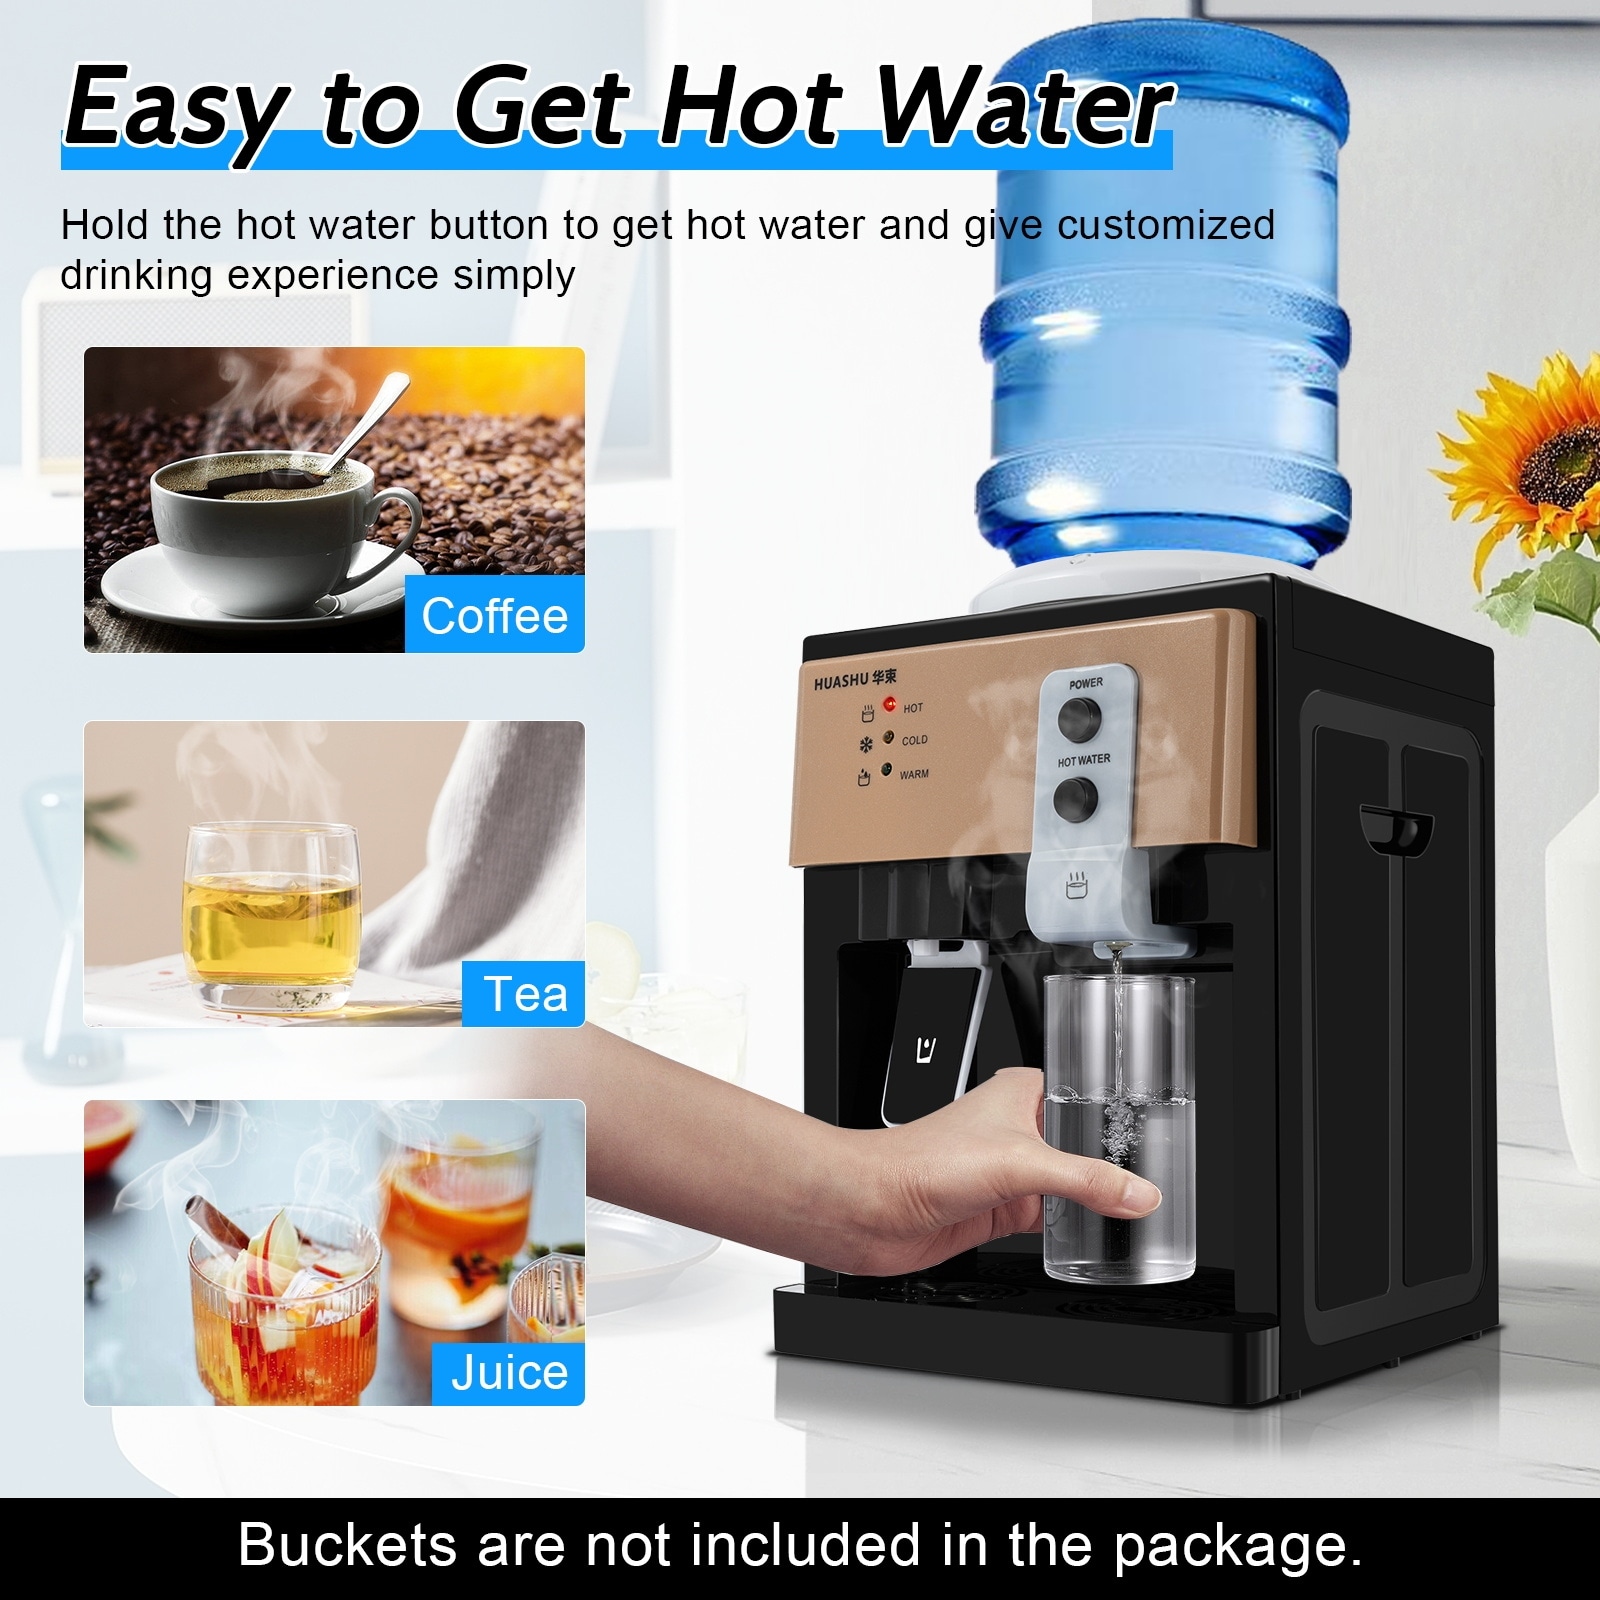 https://ak1.ostkcdn.com/images/products/is/images/direct/5aab6f352d5a97337a5aa7e725d5416f32b94e6f/Electric-Hot-and-Cold-Water-Cooler-Dispenser-for-Home-Office-Use-110V.jpg